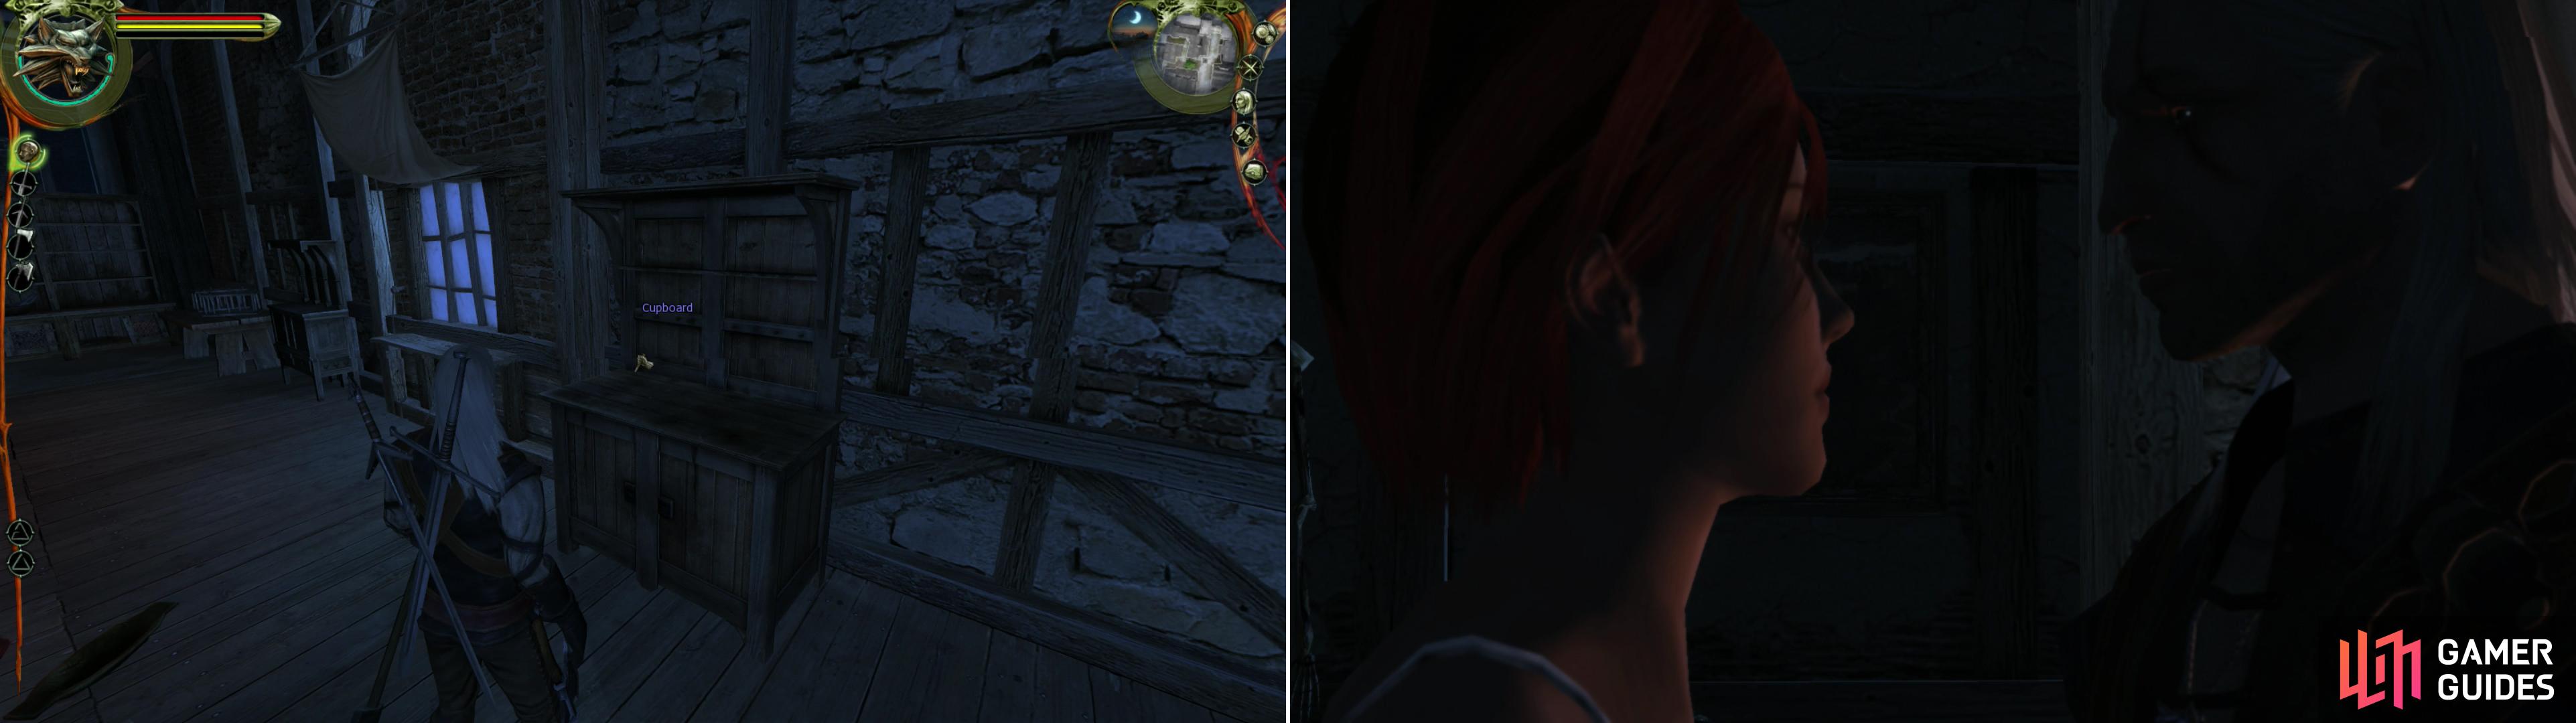 Shani’s medical expertise will prove invaluable during the autopsy (left). Leave an offering of fruit on the Altar of Melitele to score three Sephirah (right).